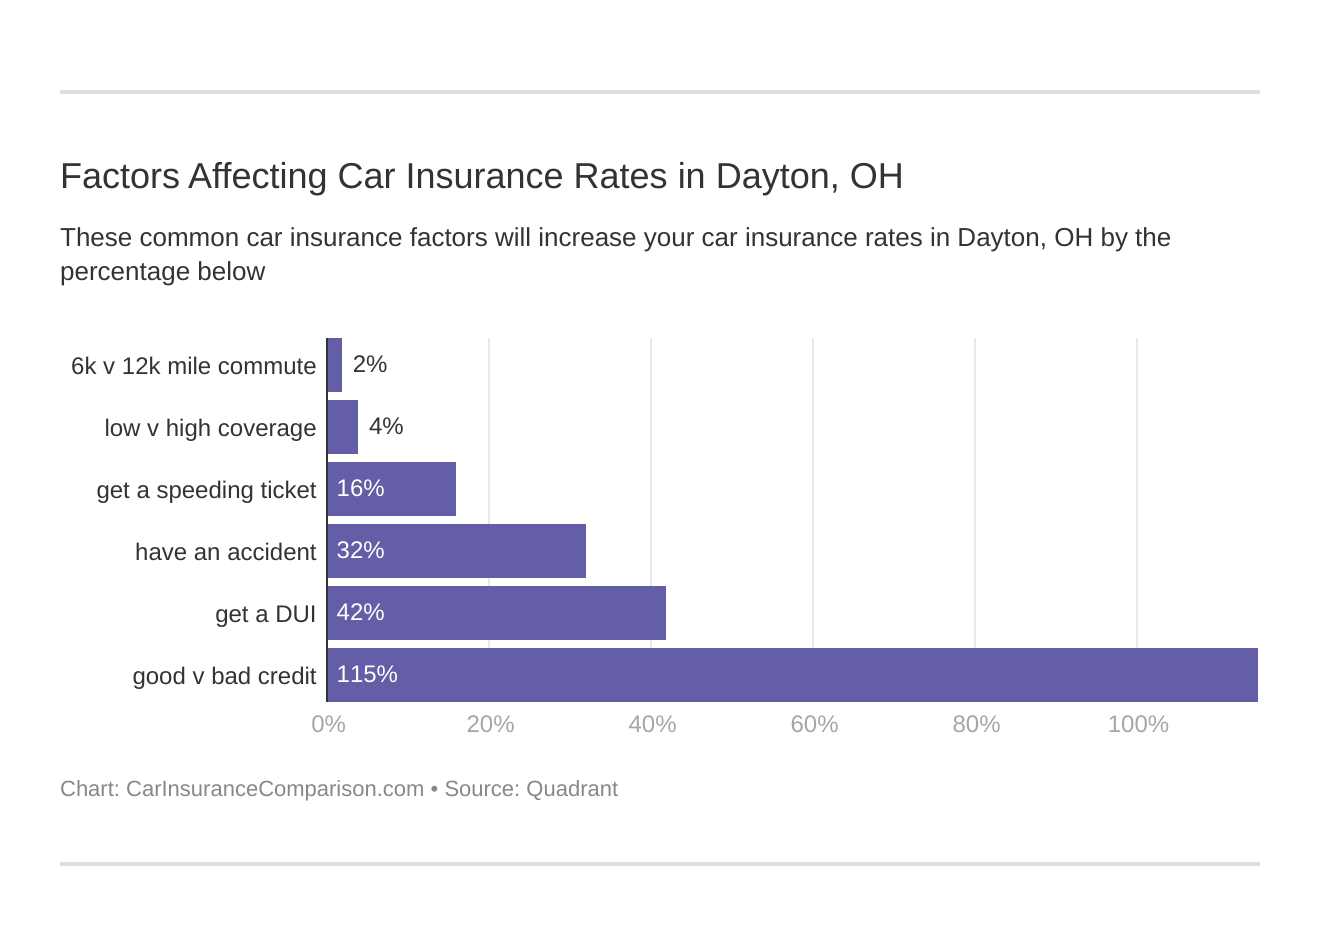 Factors Affecting Car Insurance Rates in Dayton, OH